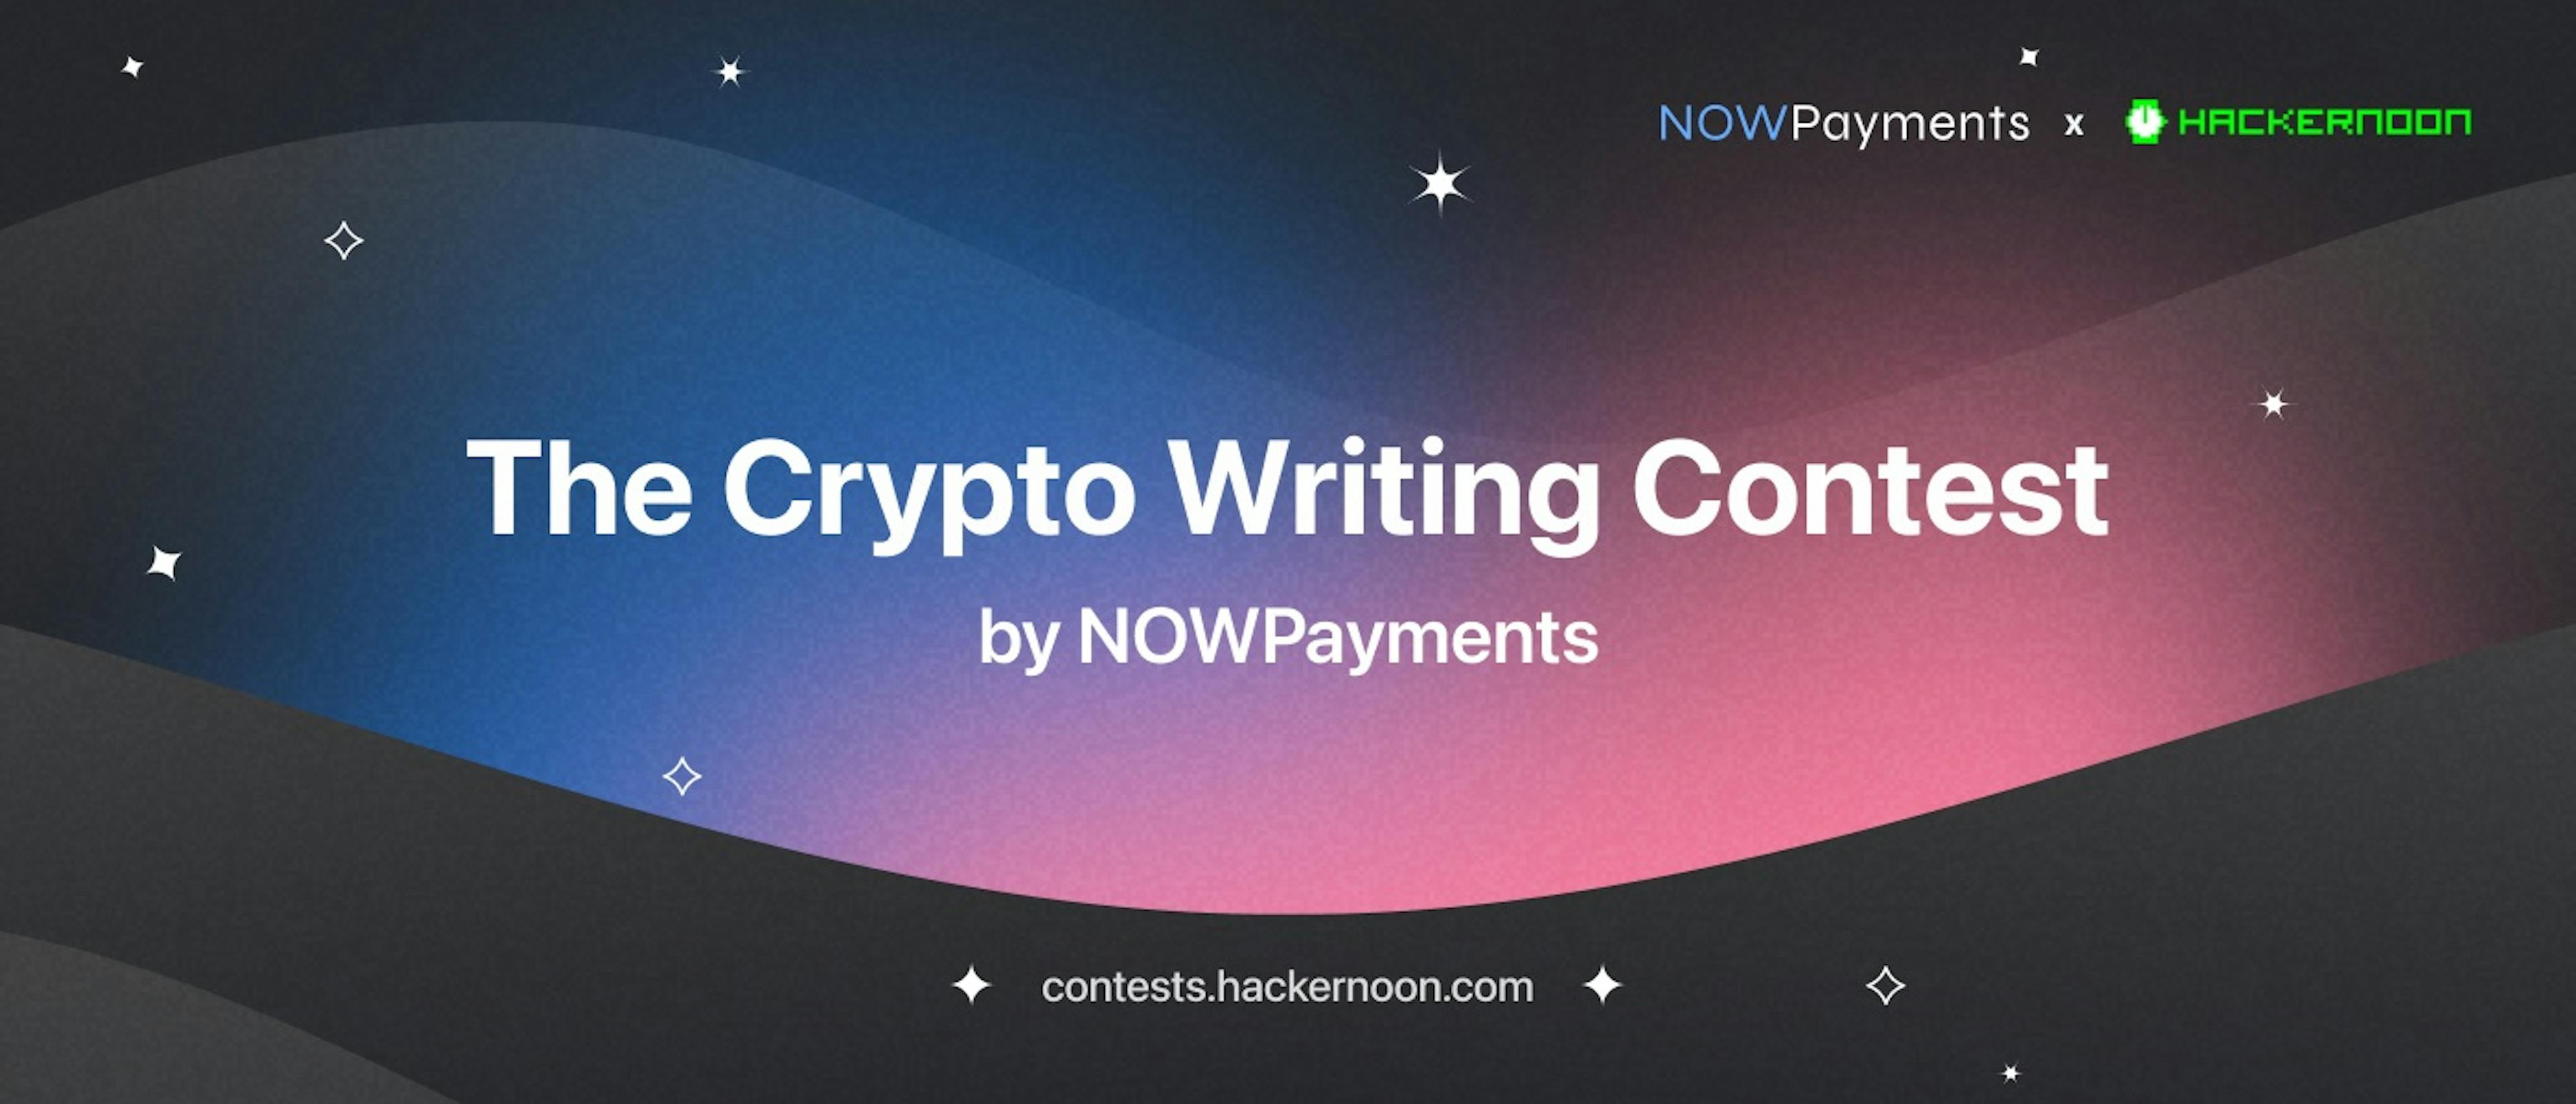 /the-crypto-writing-contest-by-nowpayments-and-hackernoon feature image